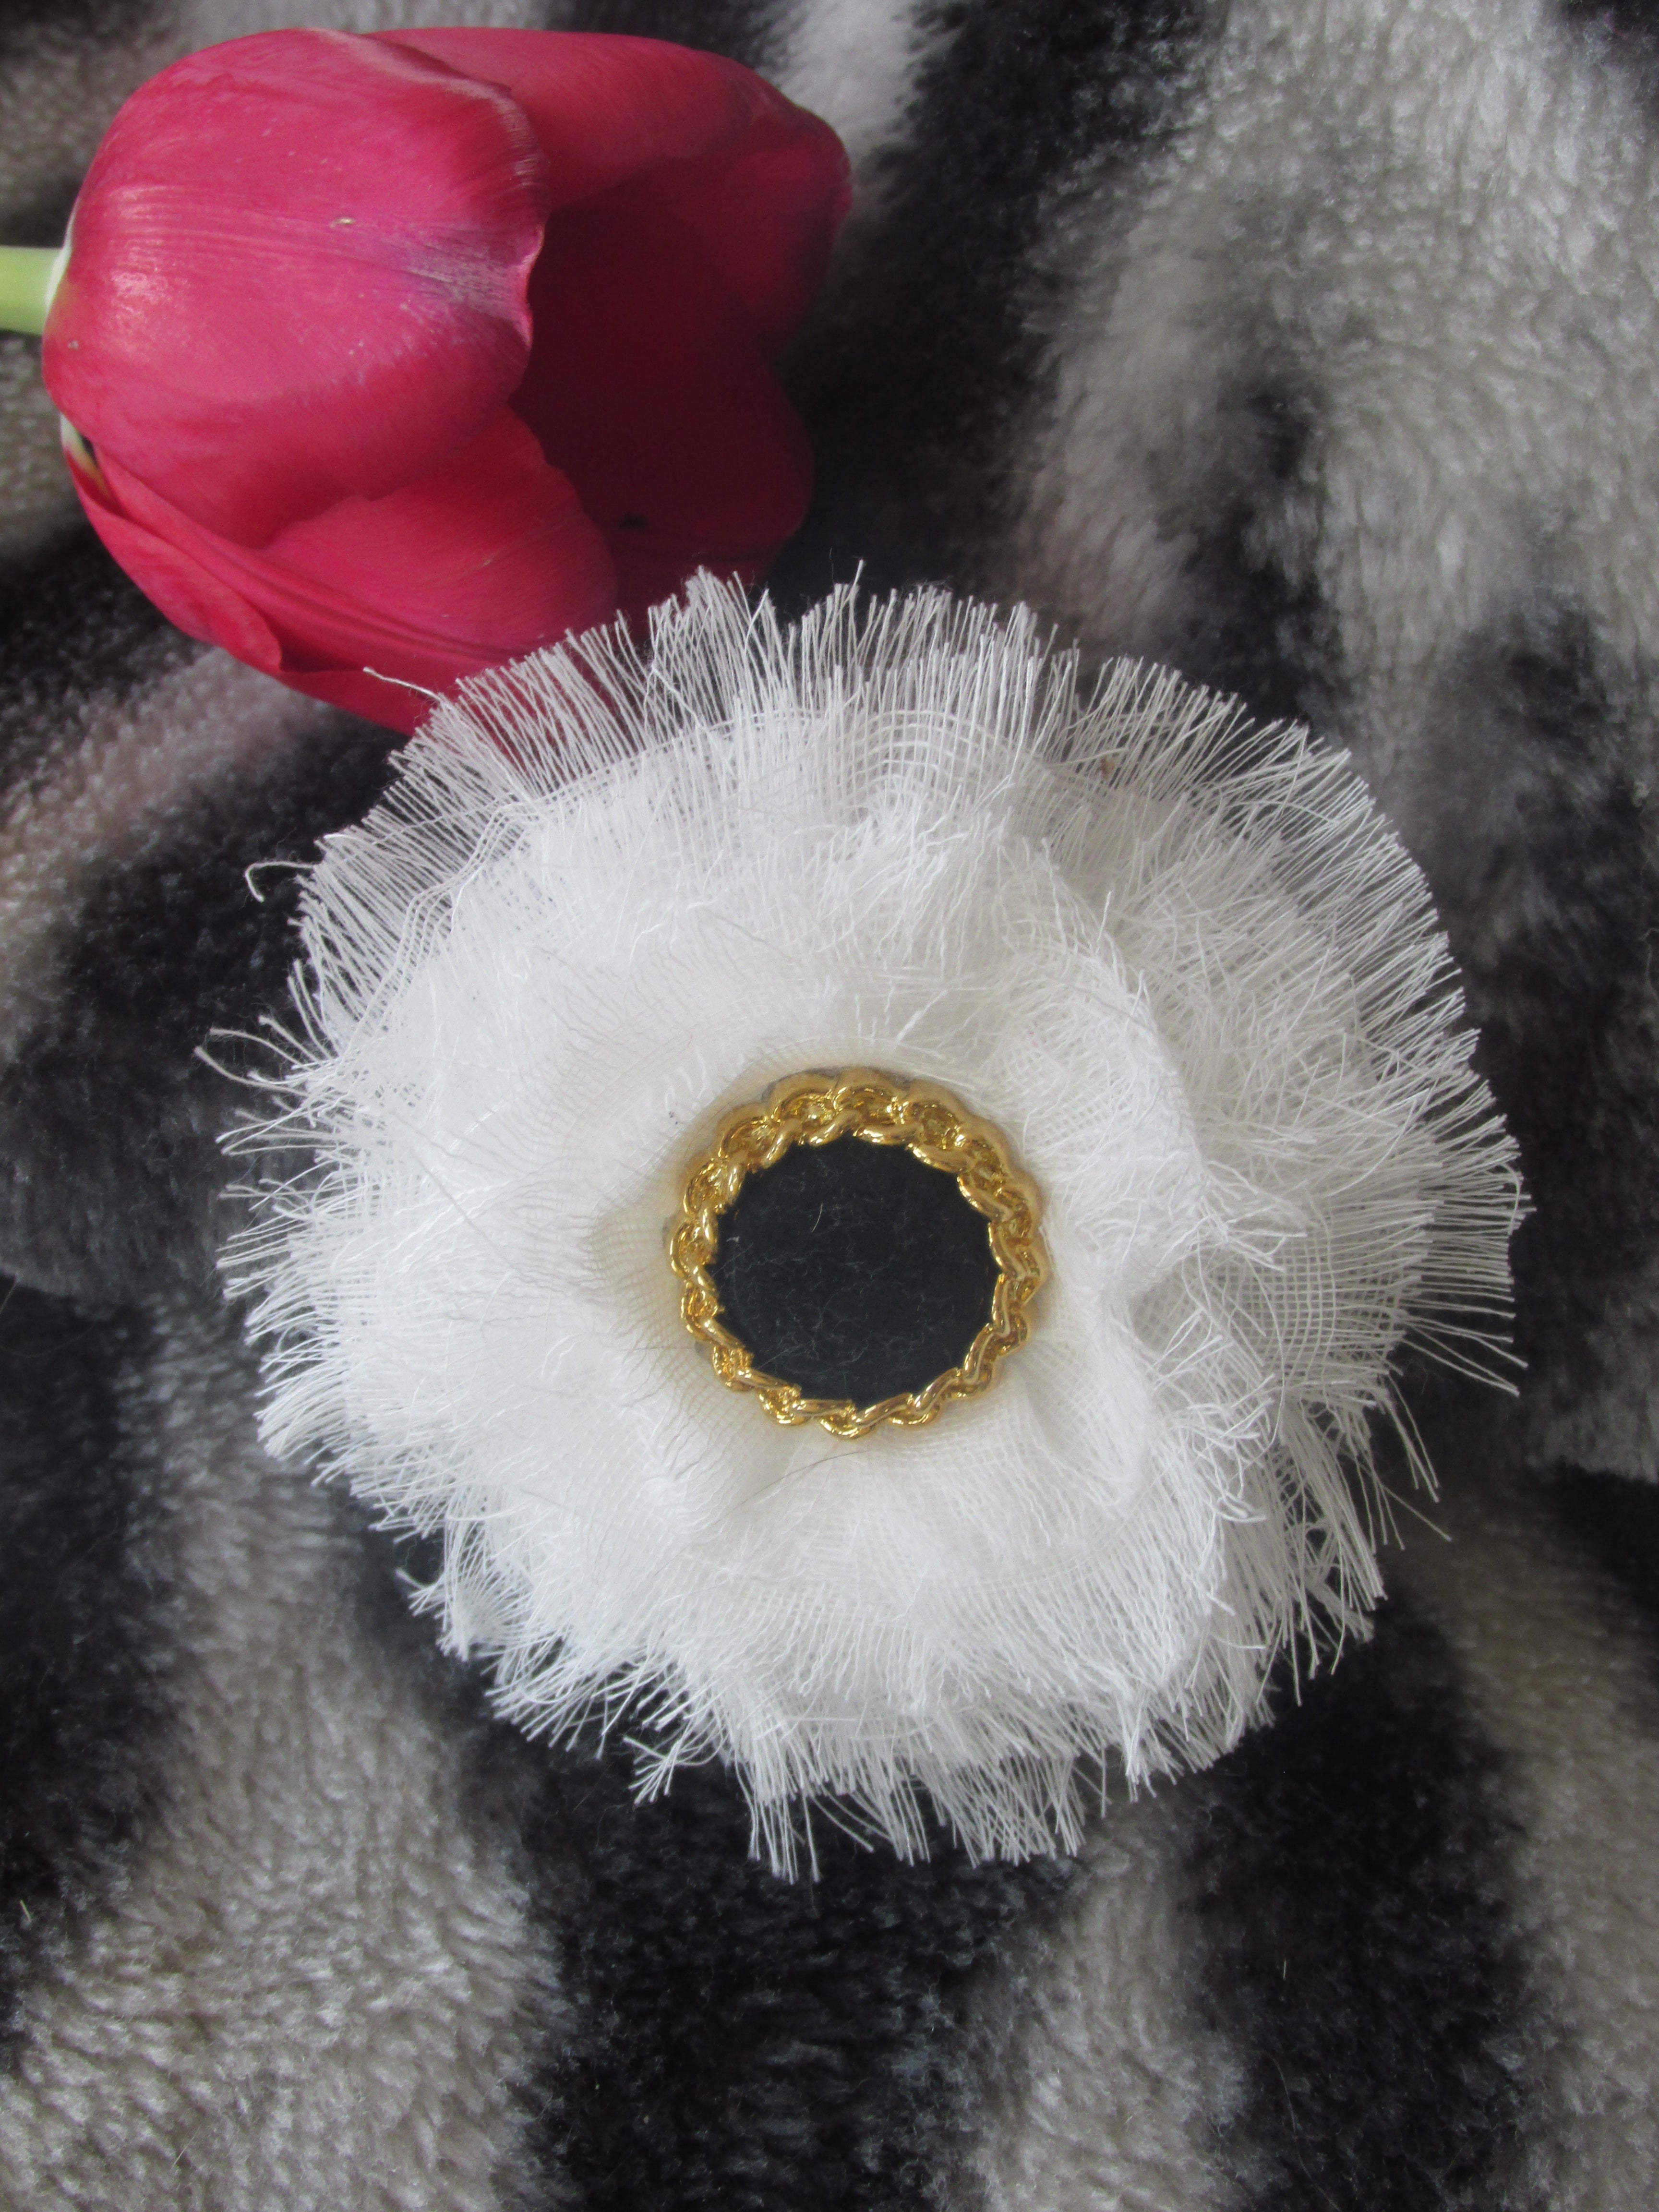 Cheesecloth Flower With Black Center